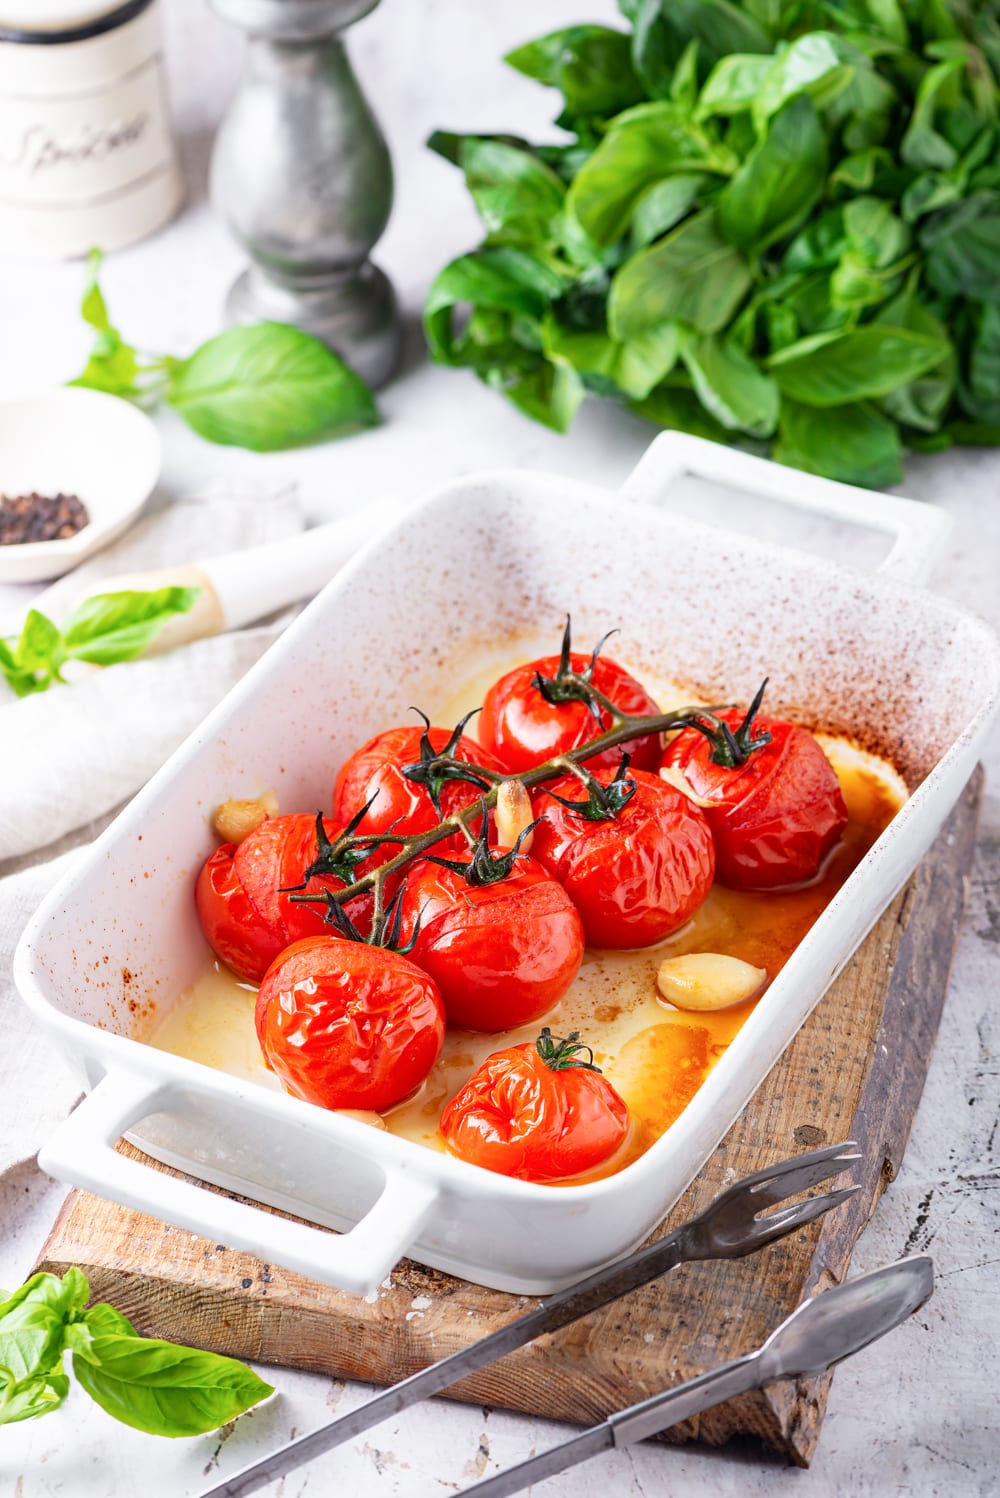 Tomato and garlic were cooked in a white baking dish with basil leaves behind.